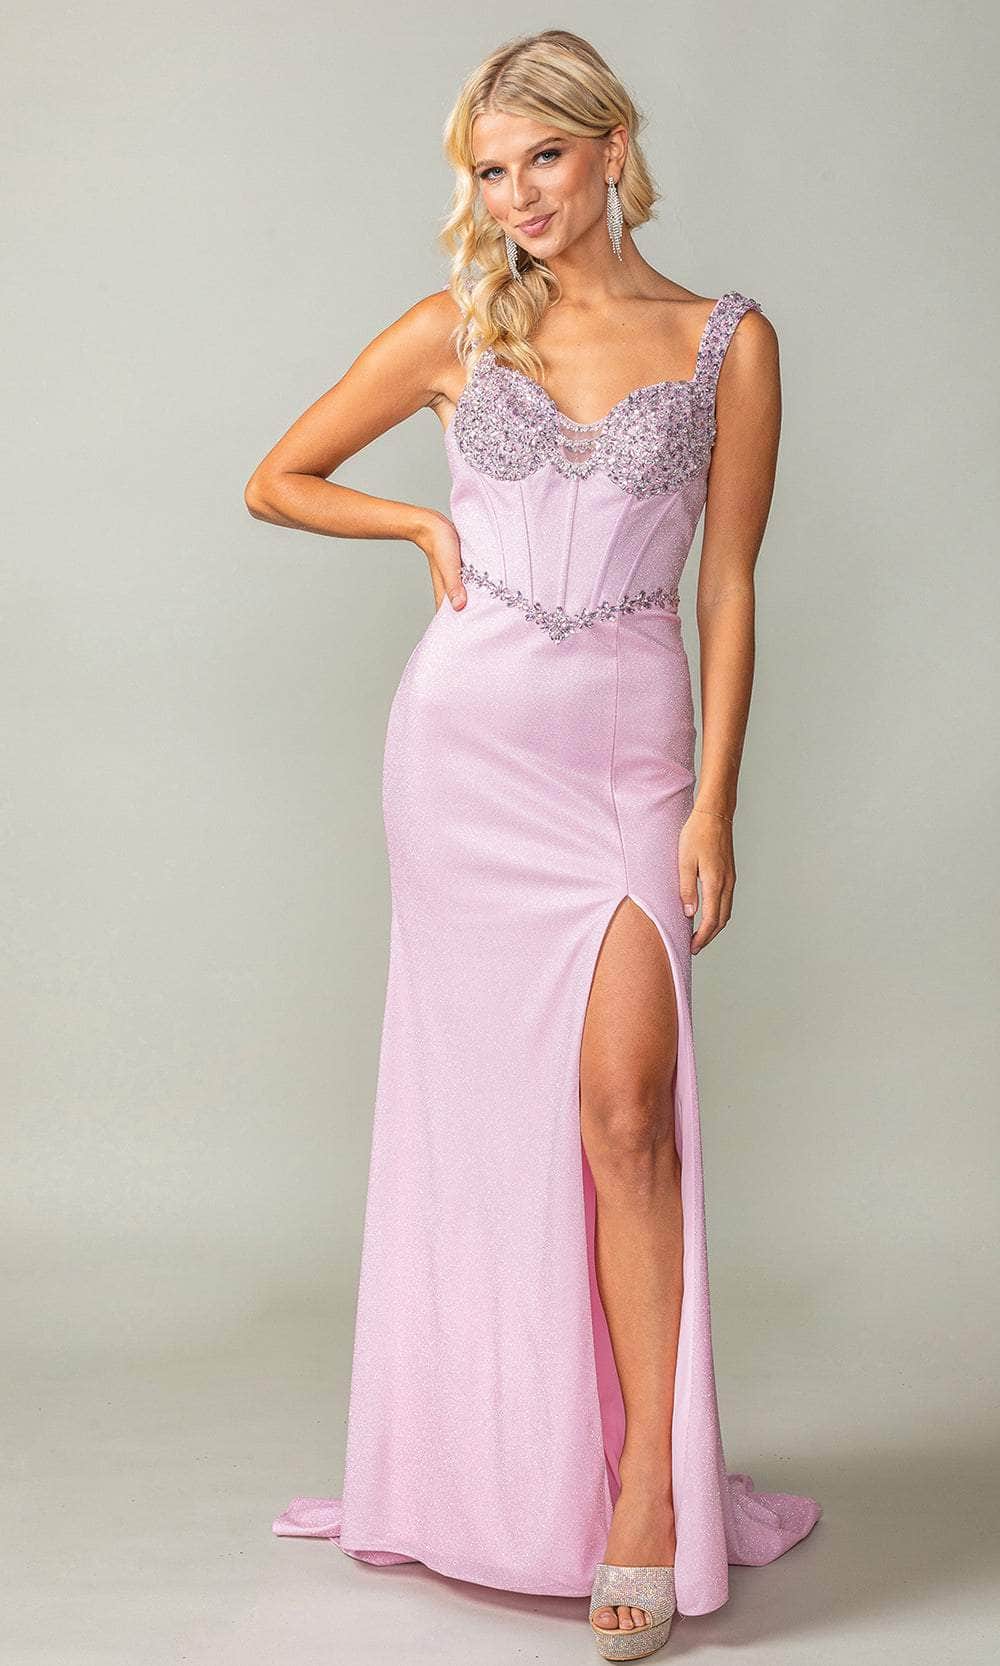 Dancing Queen 4398 - Bejeweled Sweetheart Prom Dress Prom Dresses 